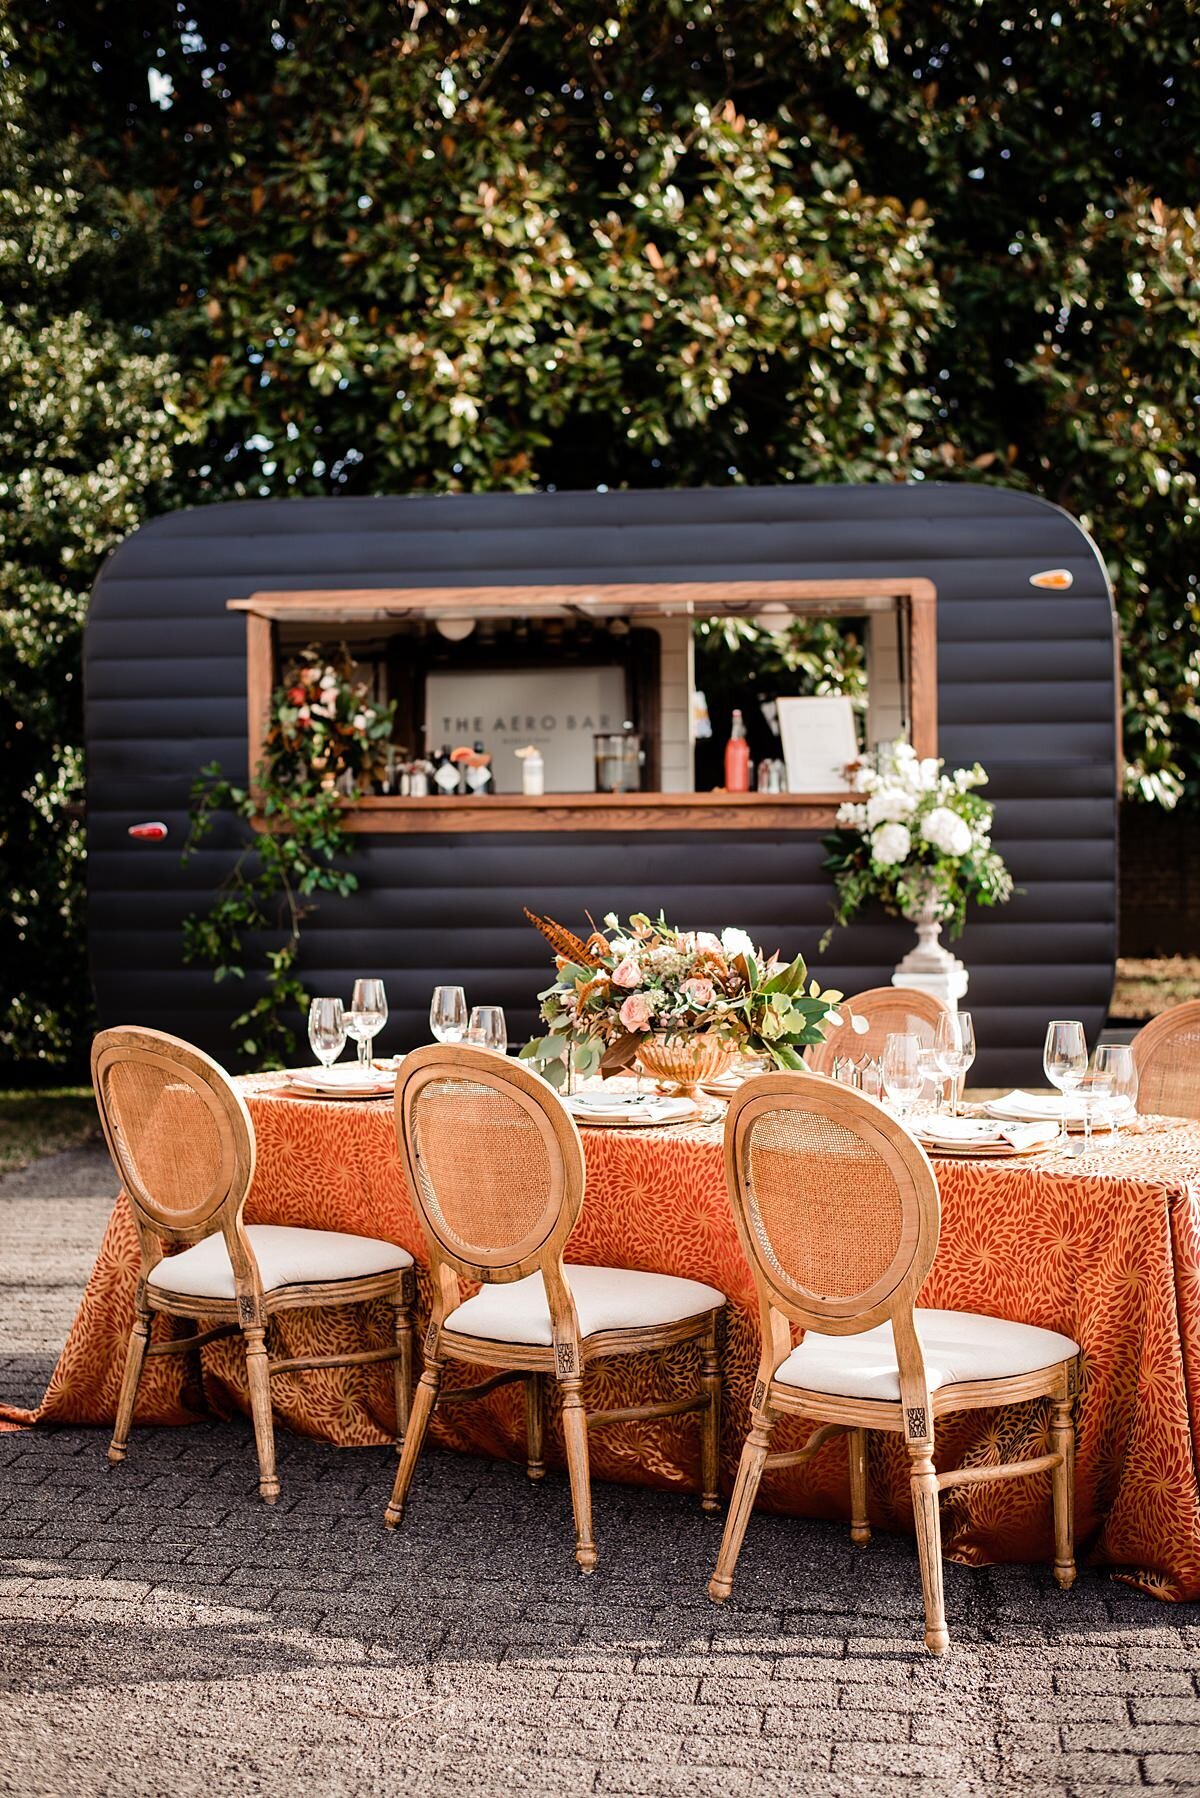 An outdoor autumn wedding at Rippa Villa with a black bar cart decorated with greenery garlands with flowers. A rectangular table covered in a pattered, rust colored  velvet tablecloth with wicker backed chairs with ivory cushions and a large floral centerpiece in a gold footed bowl. the centerpiece has white, blush, burgundy and orange flowers. The table is  set with gold chargers, rust napkins and gold flatware.